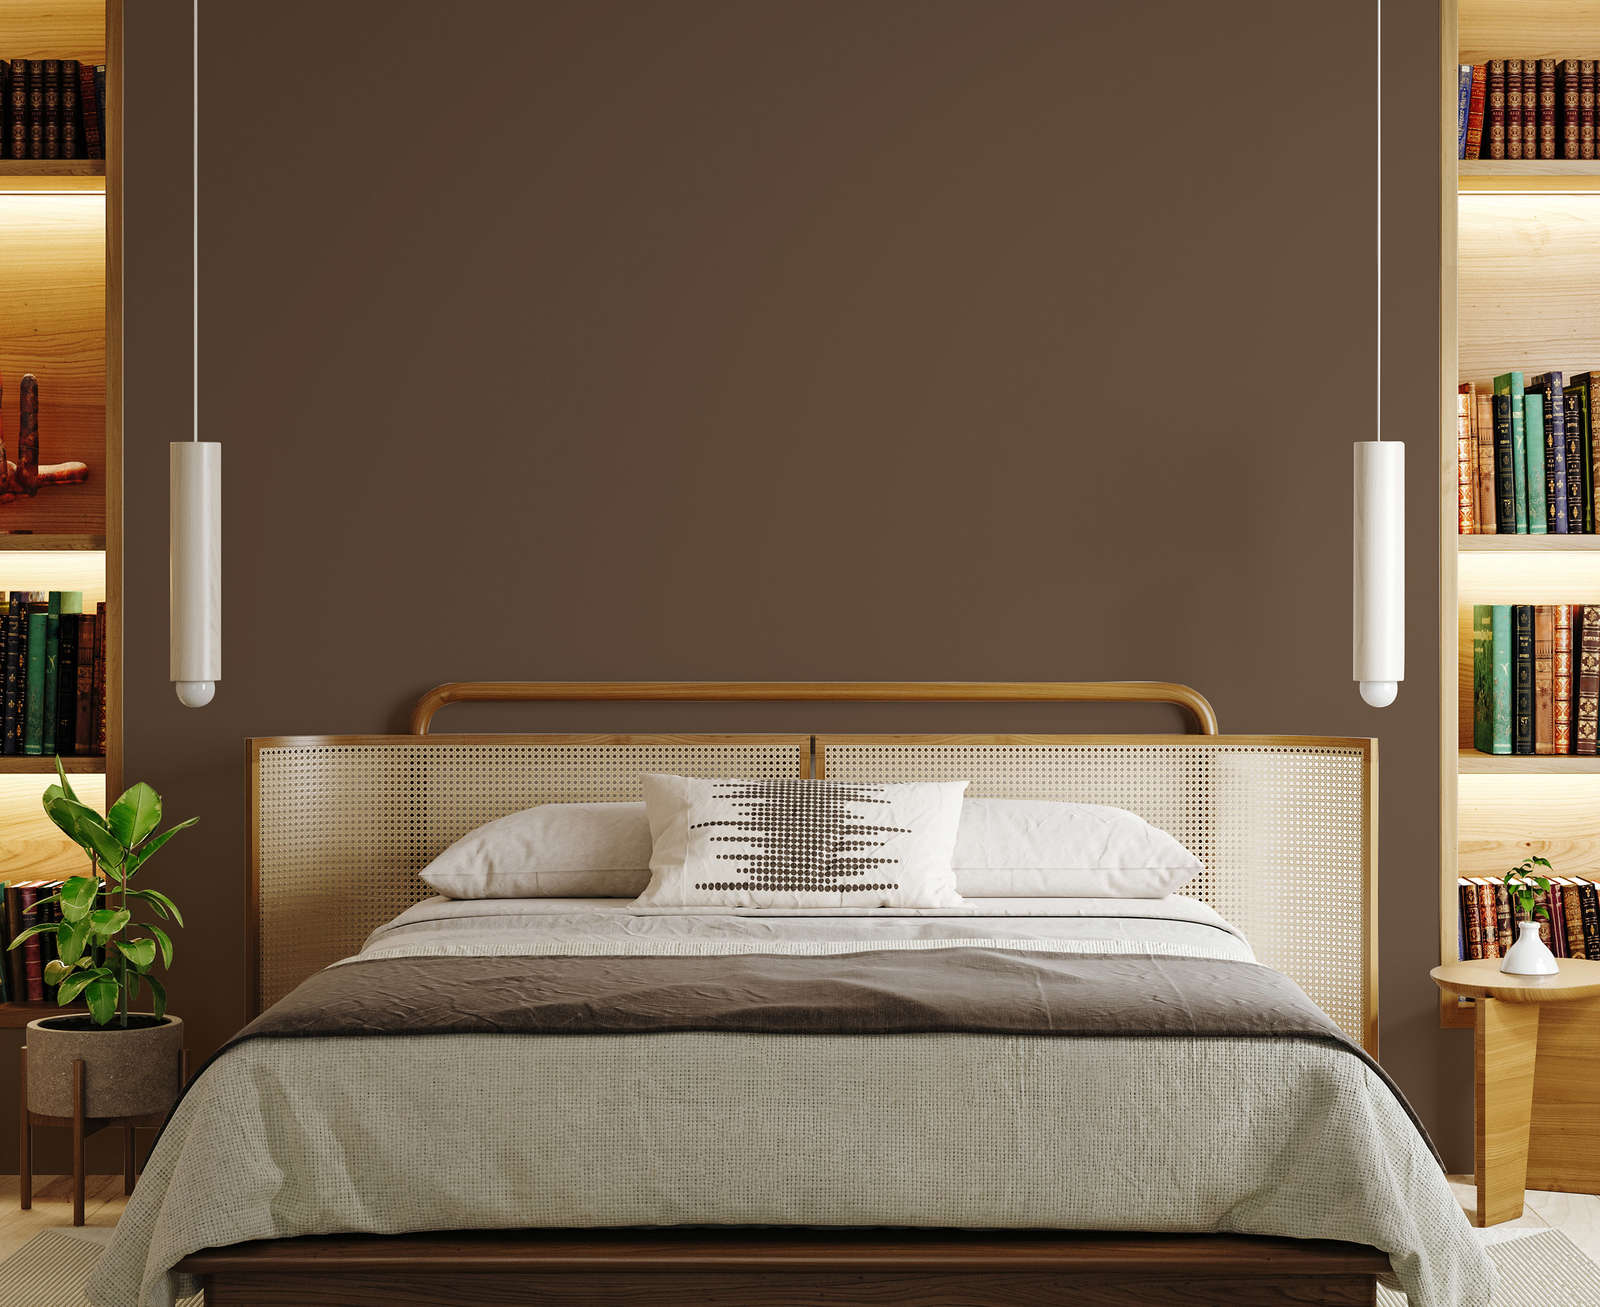             Premium Wall Paint Nature Nut Brown »Modern Mud« NW720 – 1 litre
        